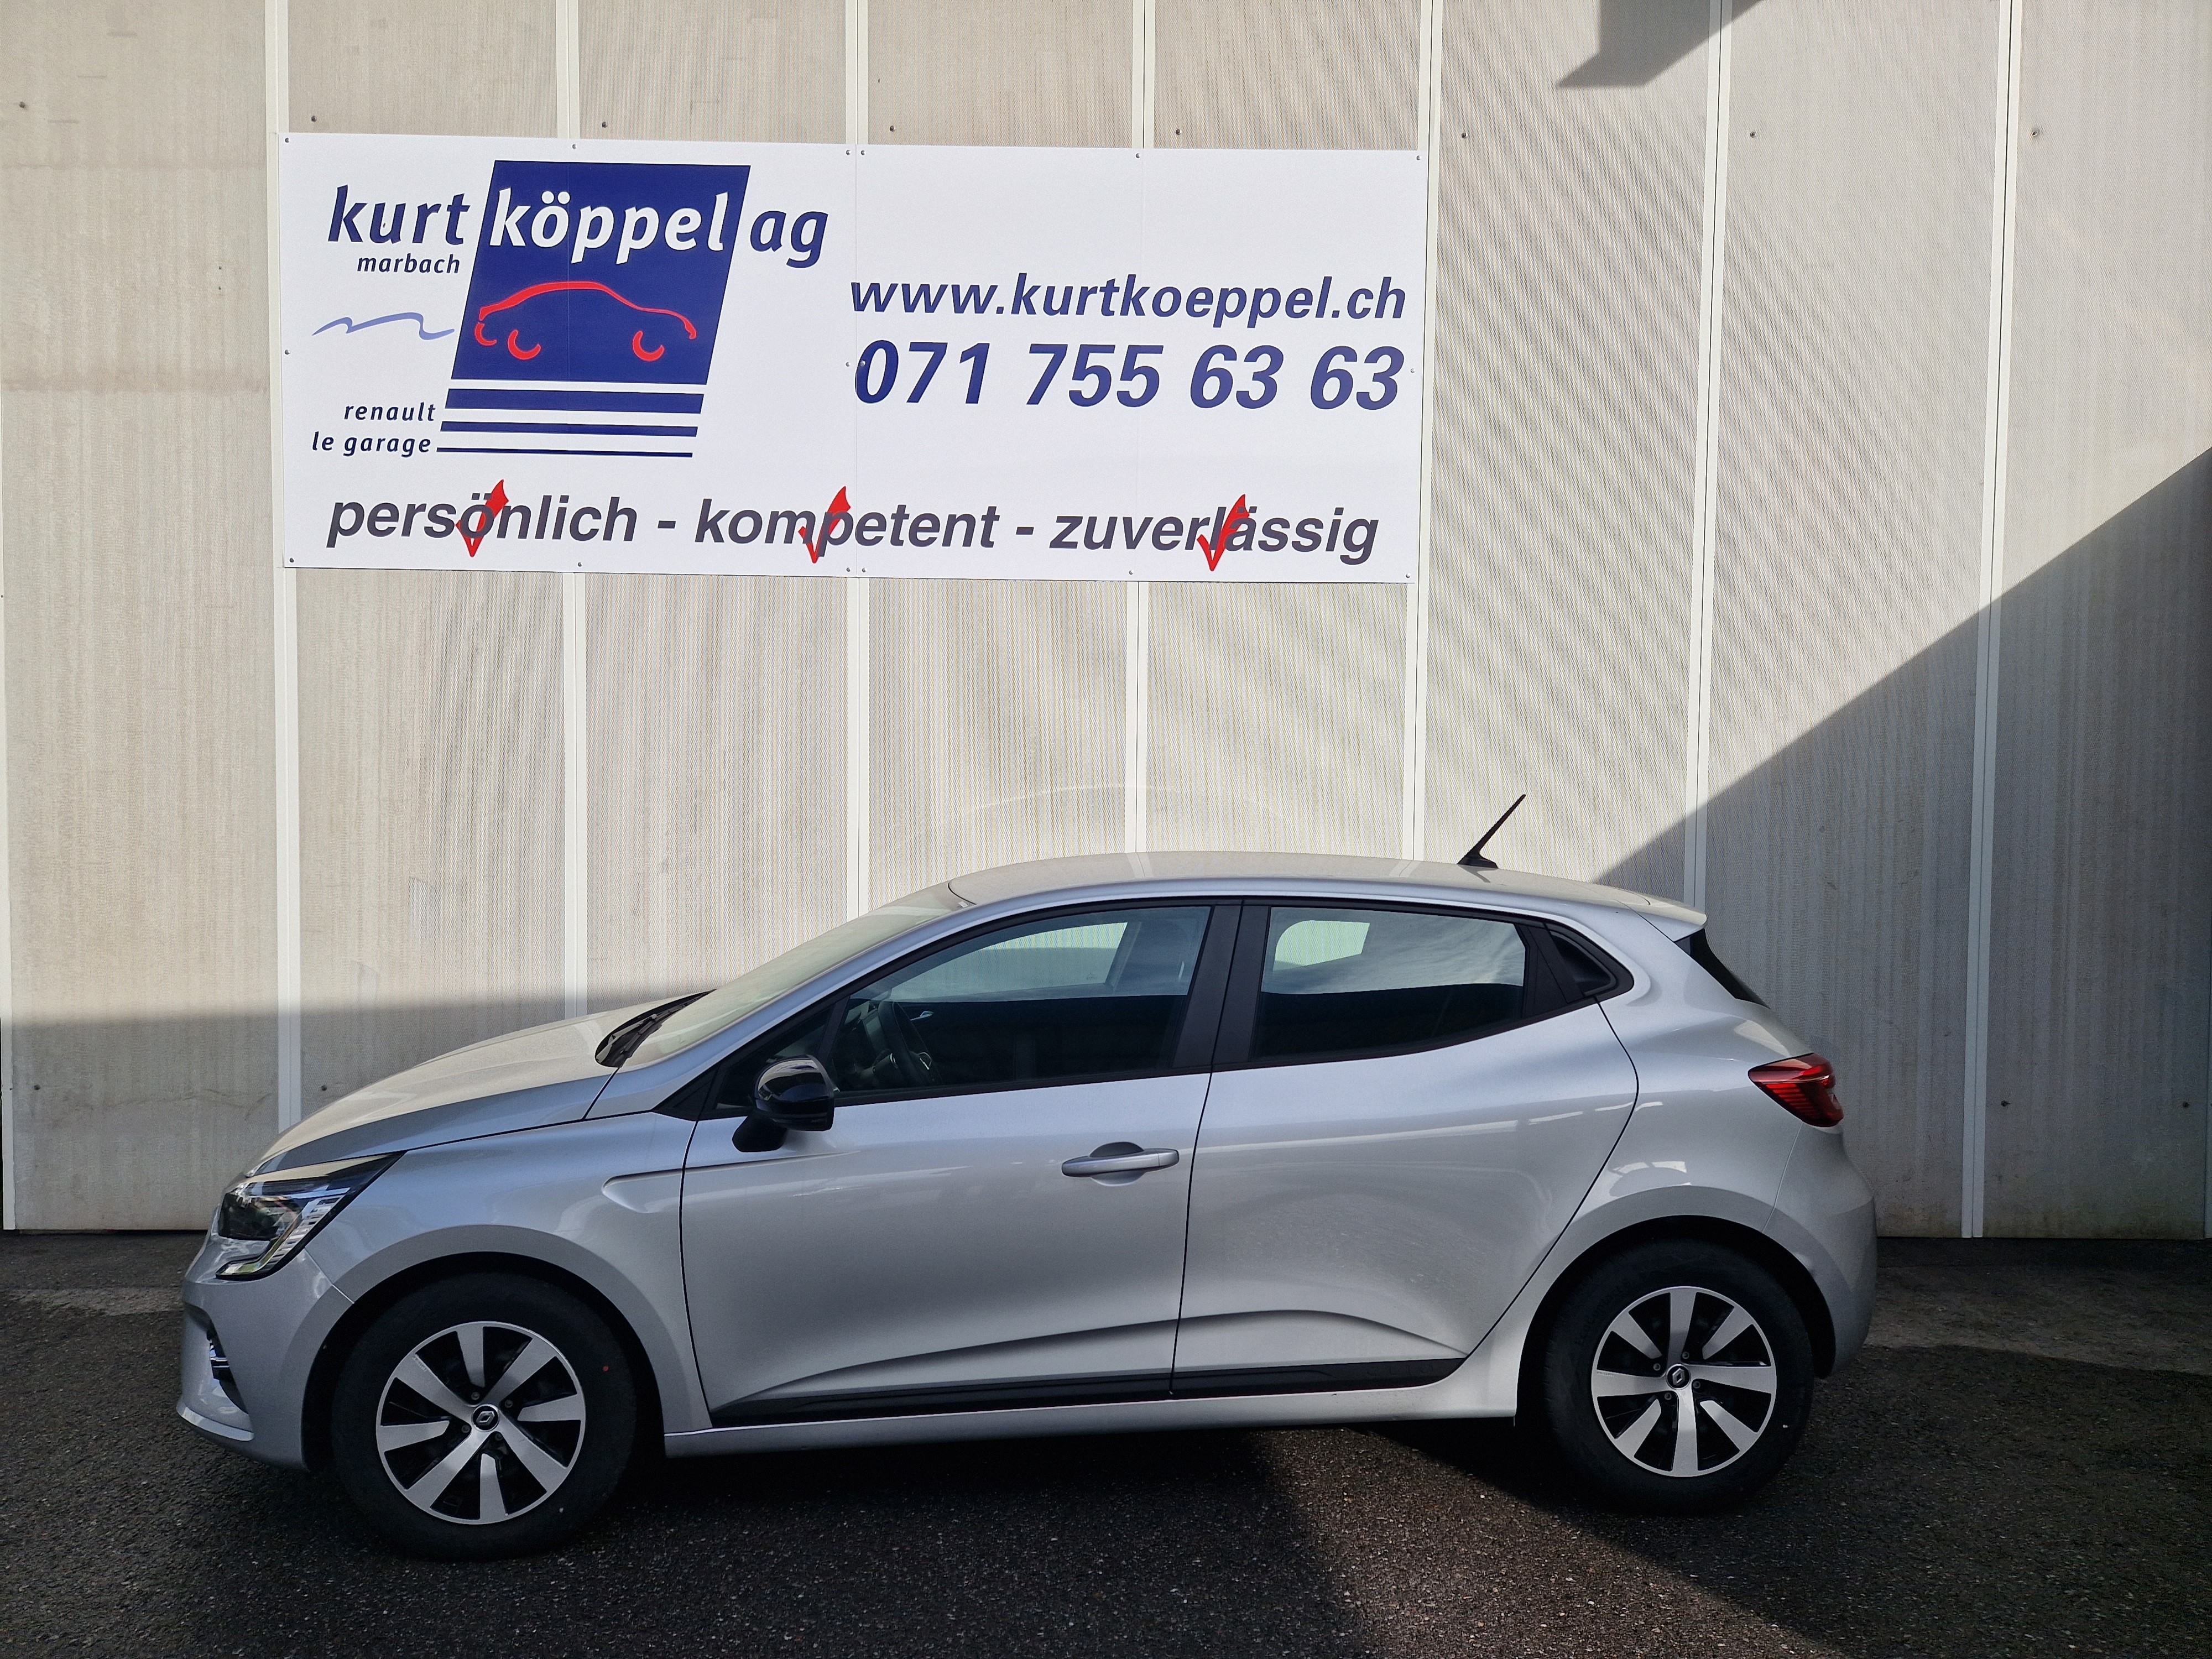 RENAULT Clio 1.0 TCe equilibre CVT